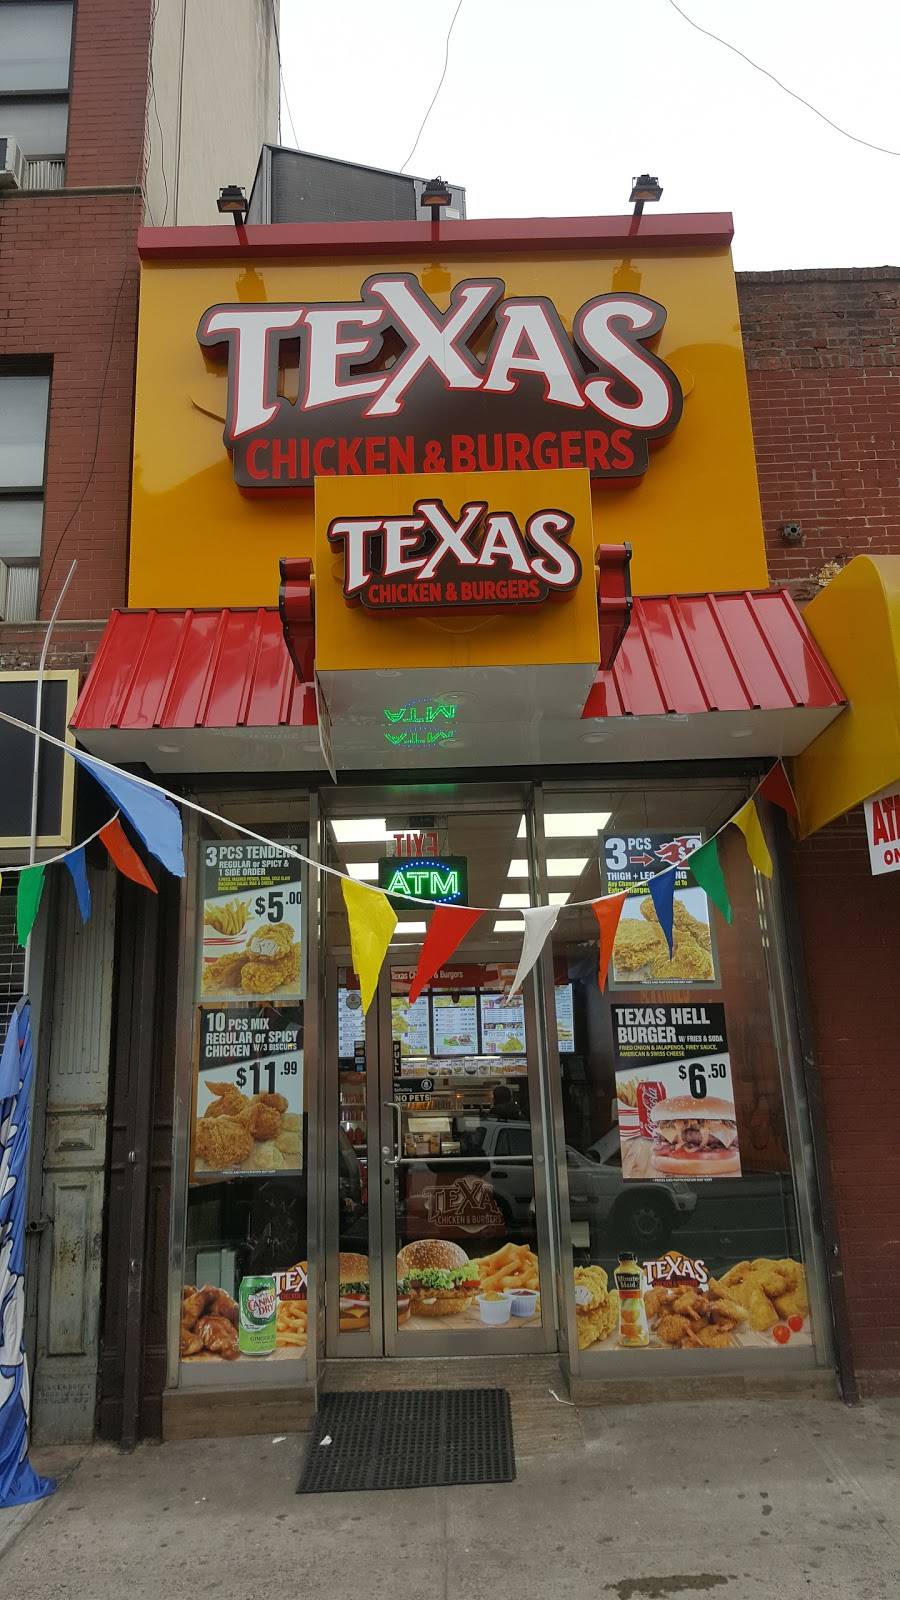 Texas Chicken & Burgers | restaurant | 1974 2nd Ave, New York, NY 10029, USA | 2128313701 OR +1 212-831-3701